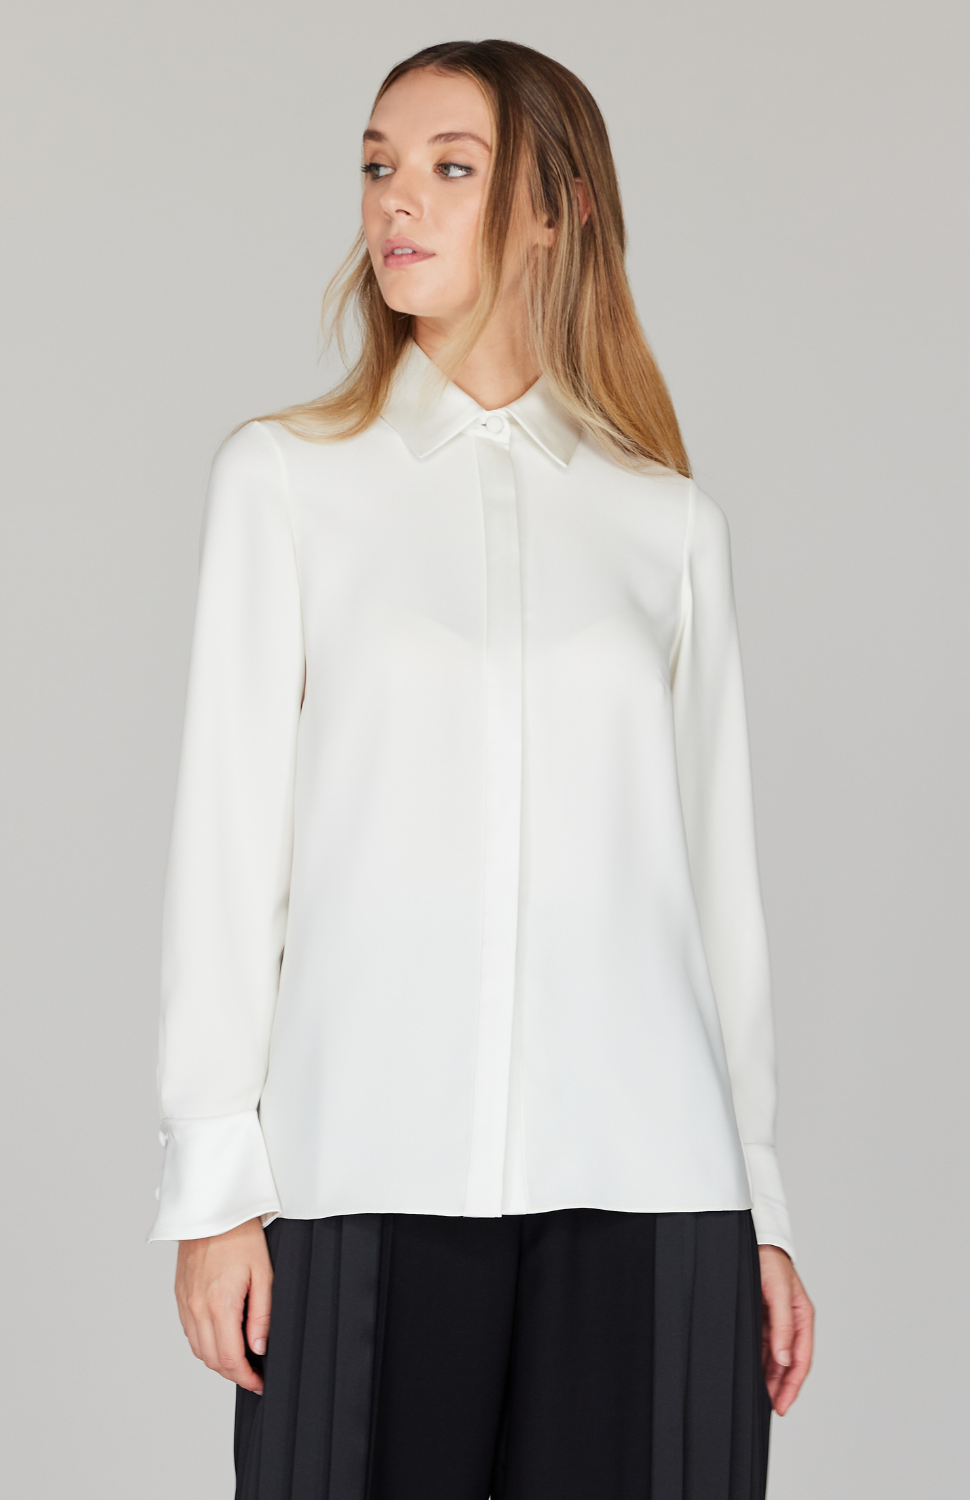 Pleat Back Collared Shirt